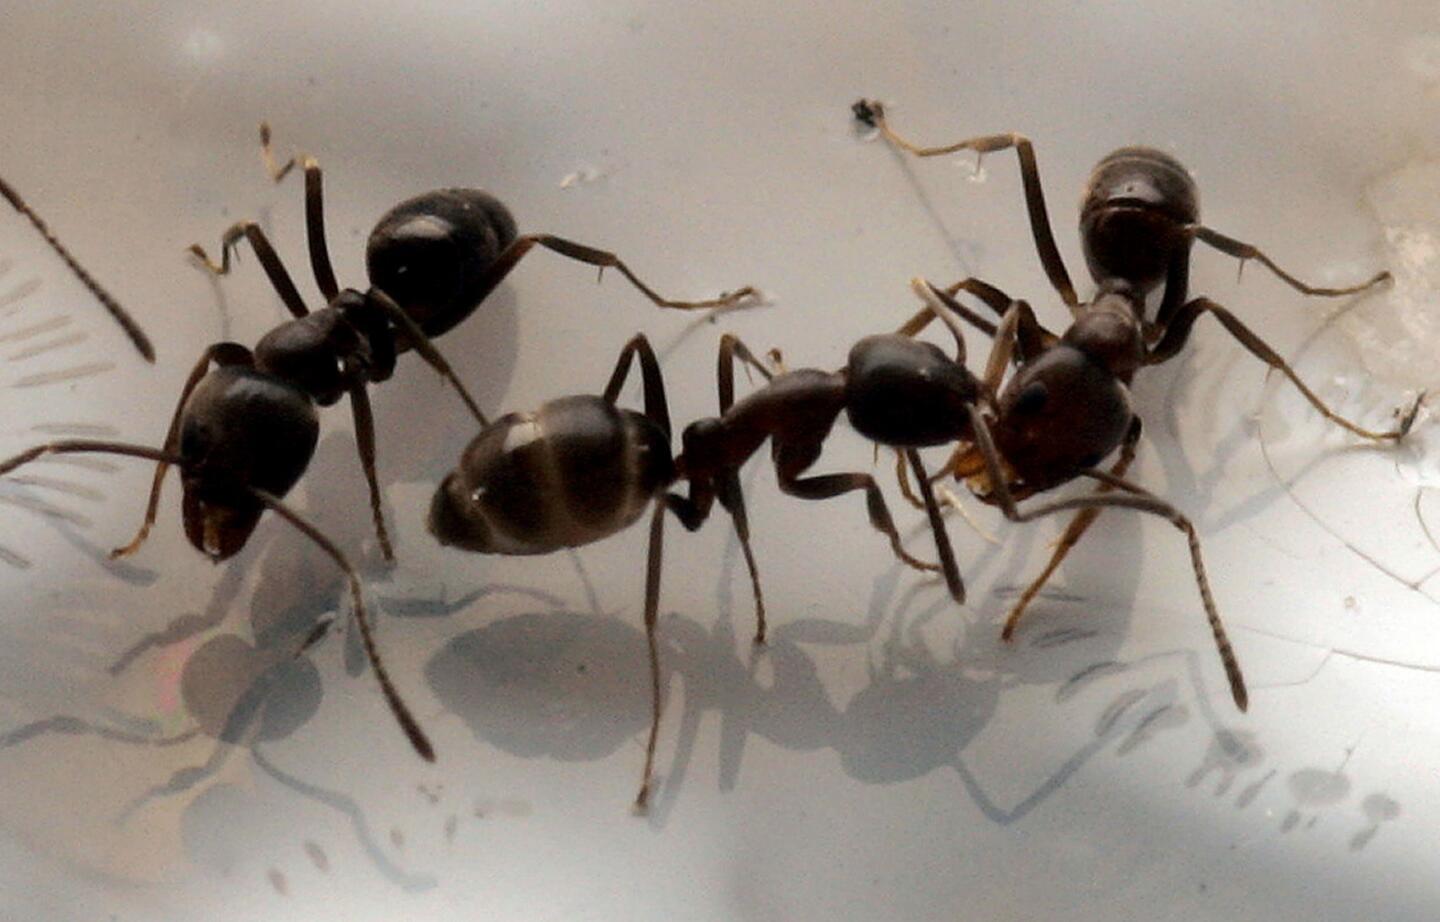 When facing oncoming floodwaters, ants use their helpless babies as floating life-preservers - by sticking them at the very bottom of the life rafts that they build with their bodies. It sounds cruel, but it maximizes the group's buoyancy and thus their chances of survival. MORE